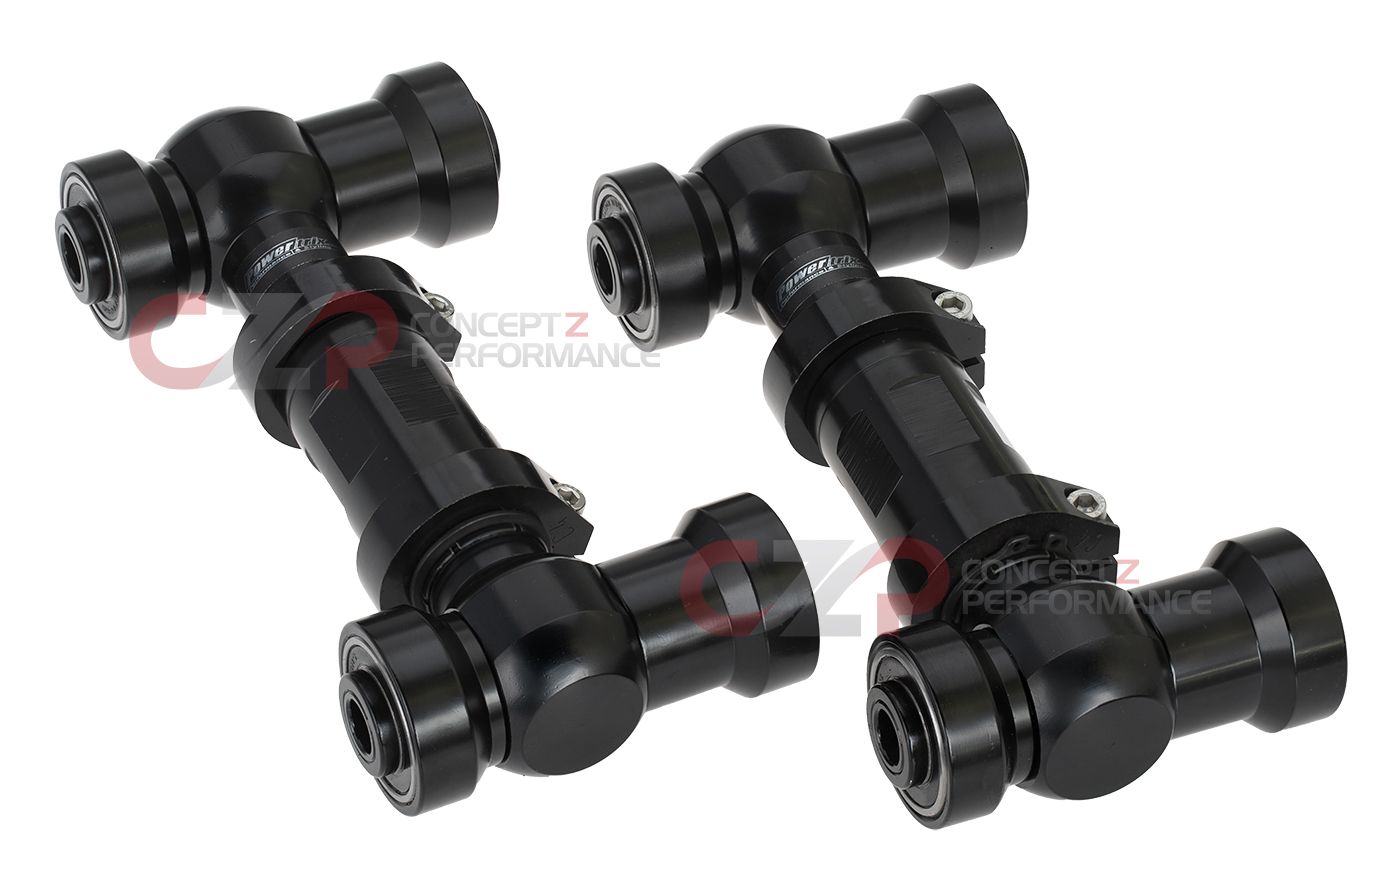 Powertrix Front Adjustable Camber Upper Control Arms - Nissan 300ZX Z32